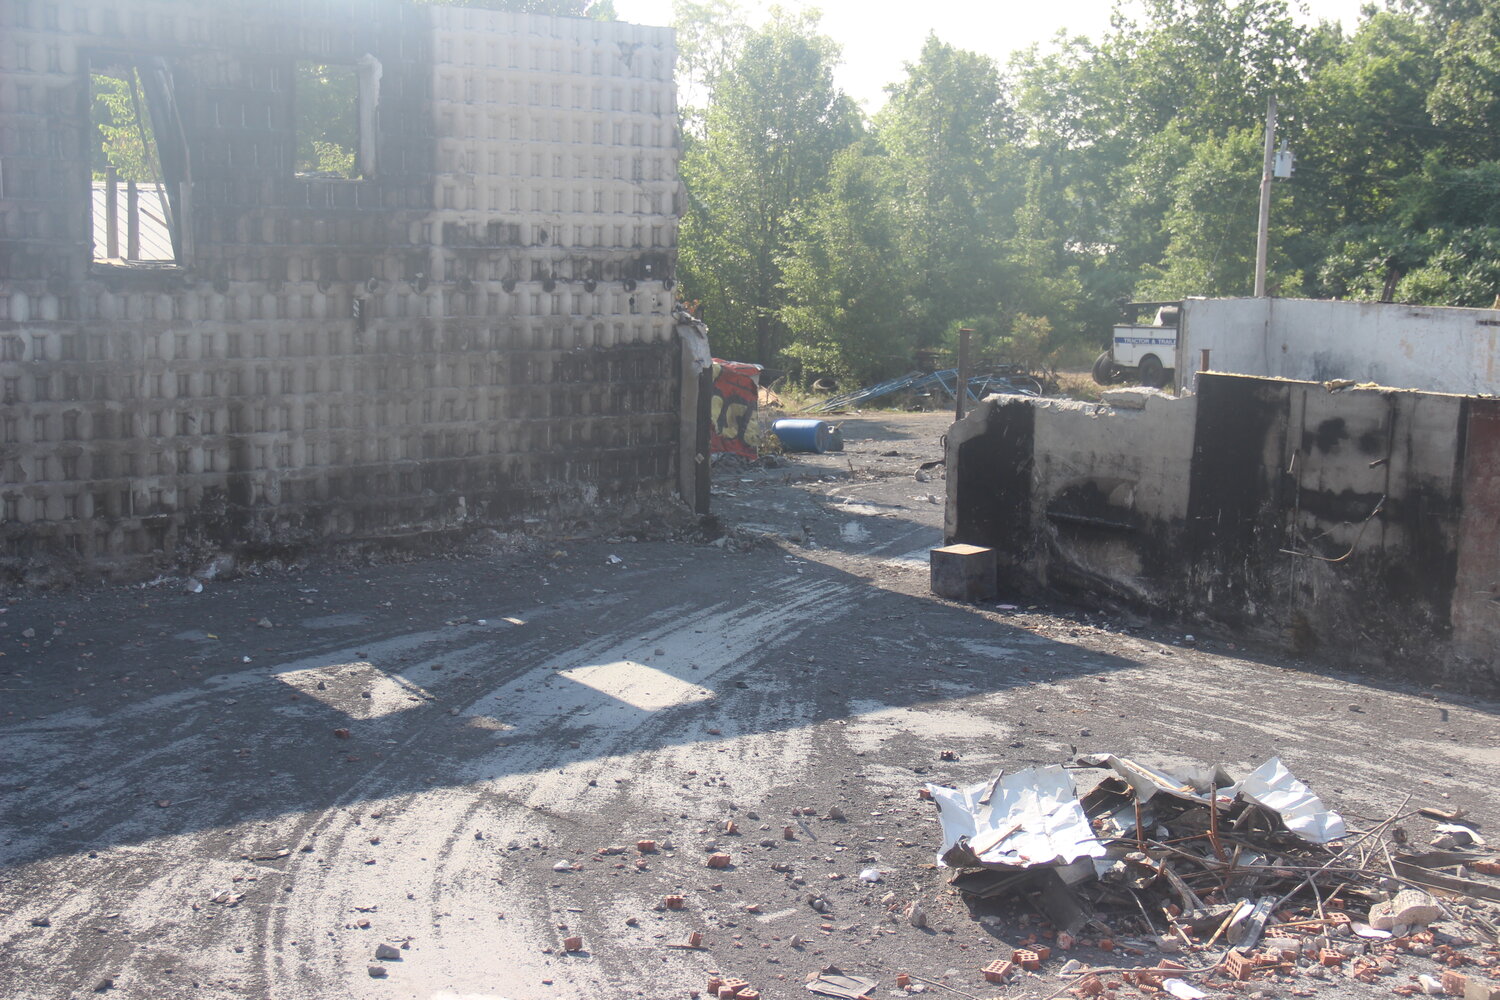 An overview of what remains of Abundant Life Church in Warrenton following the June 12 fire.